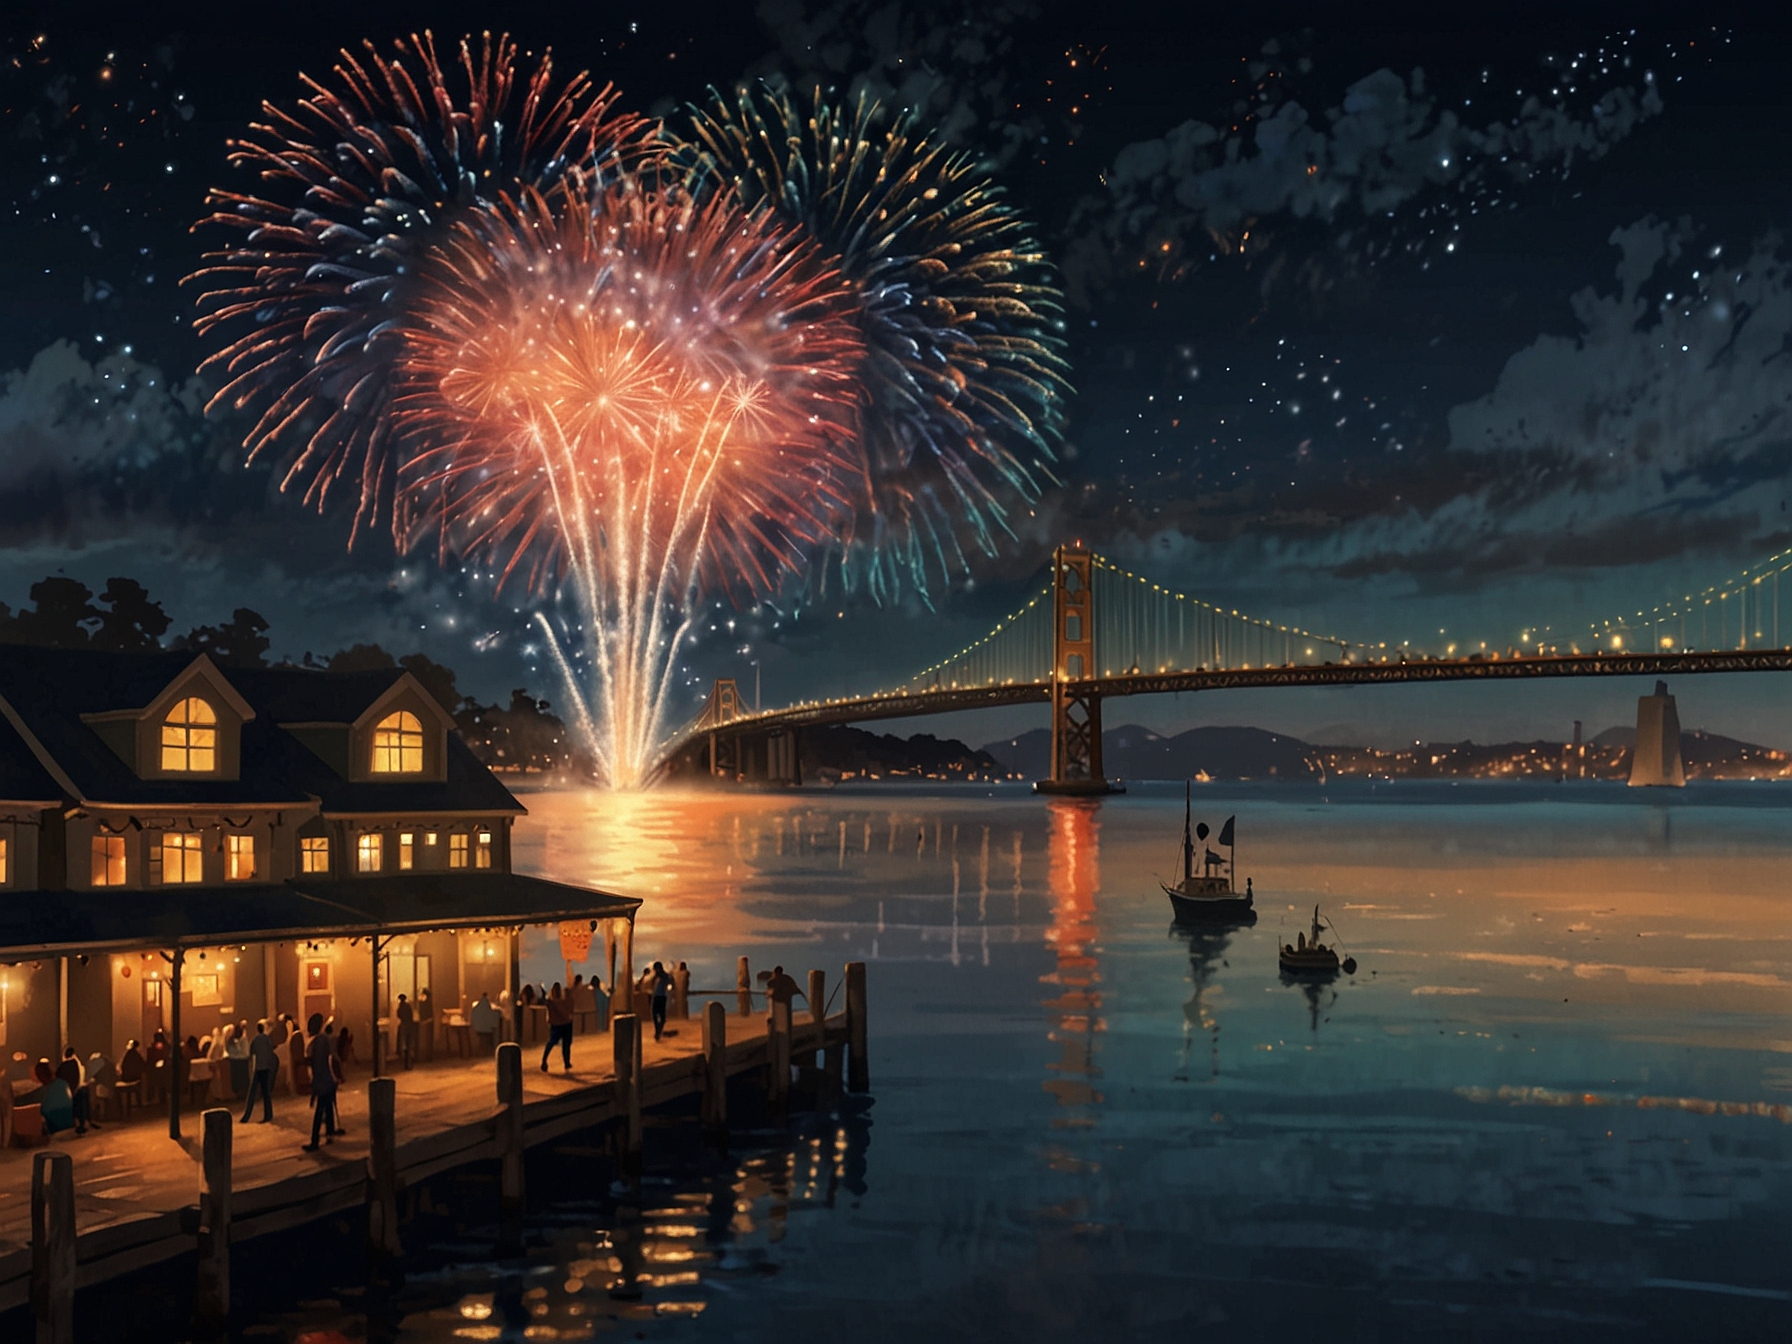 A stunning view of fireworks lighting up the sky over San Francisco Bay, with crowds gathered at Pier 39 and Fisherman's Wharf enjoying the festive atmosphere.